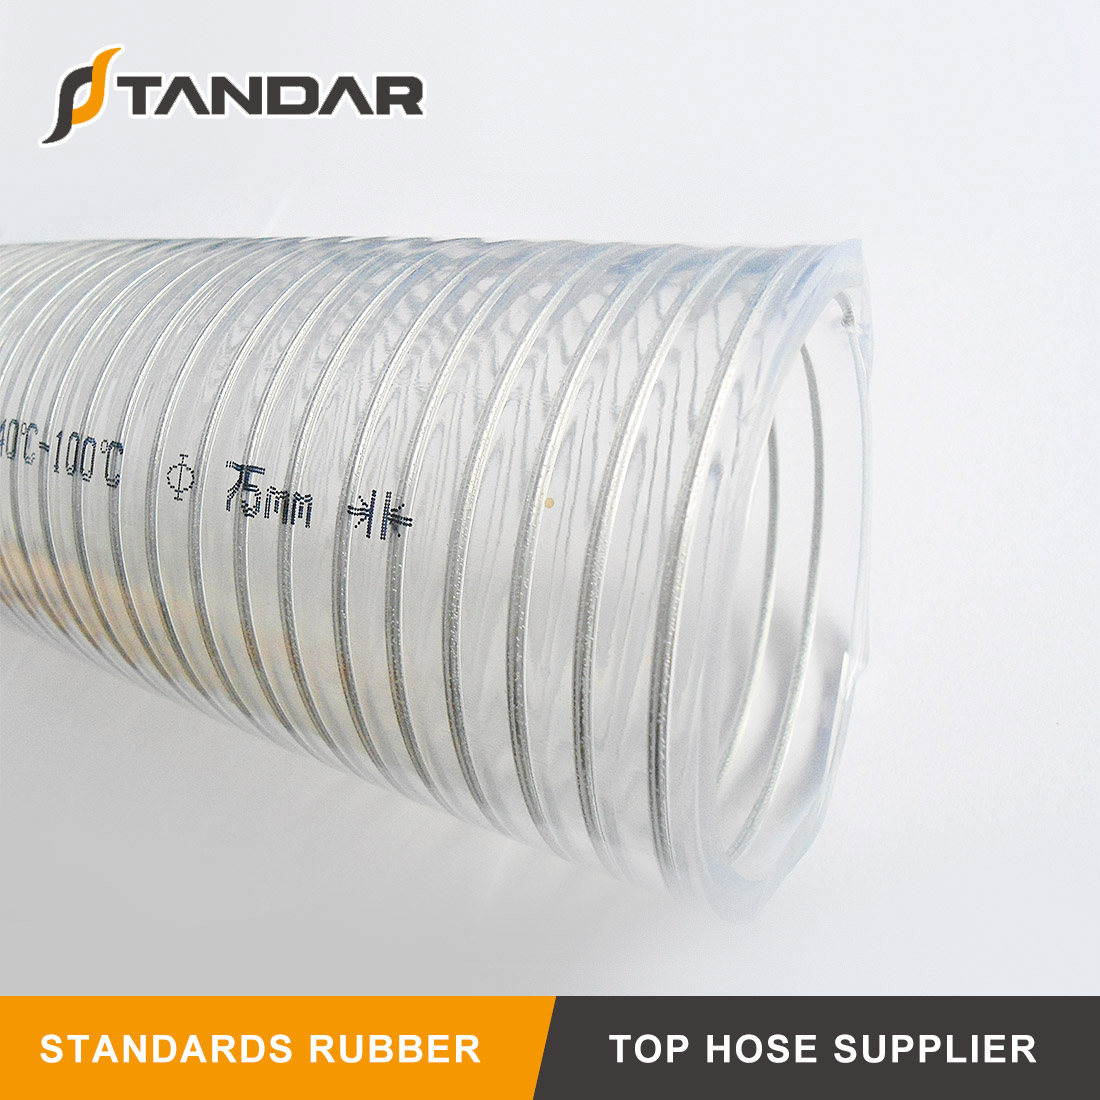 High Pressure clear soft platinum cured thin wall FDA SS wire Reinforced food grade Silicone tubing